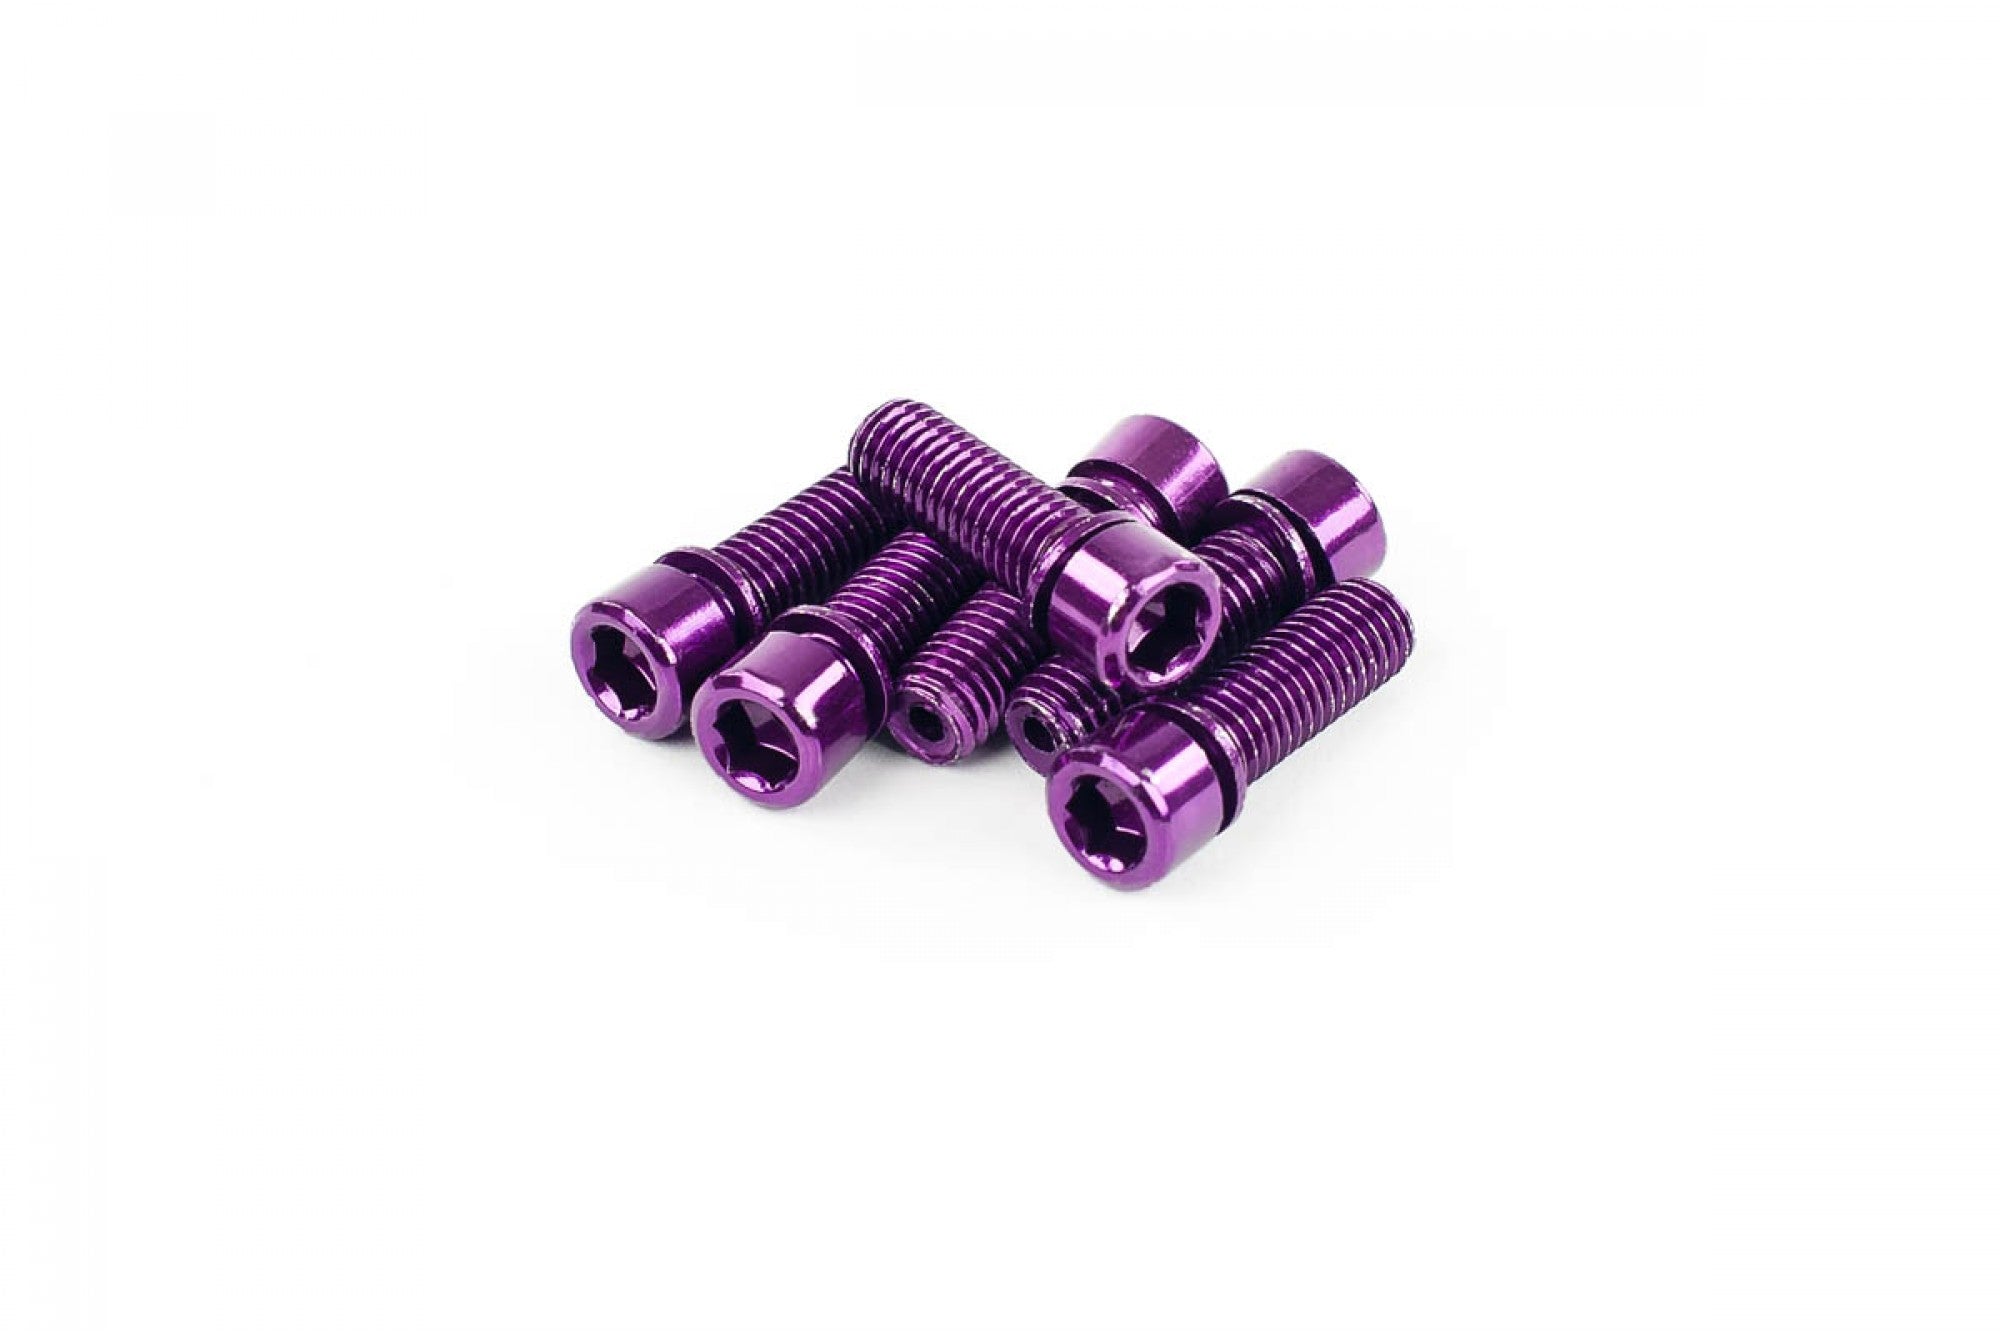 Mission Bicycle Stem 26mm Bolts (Various Colors)